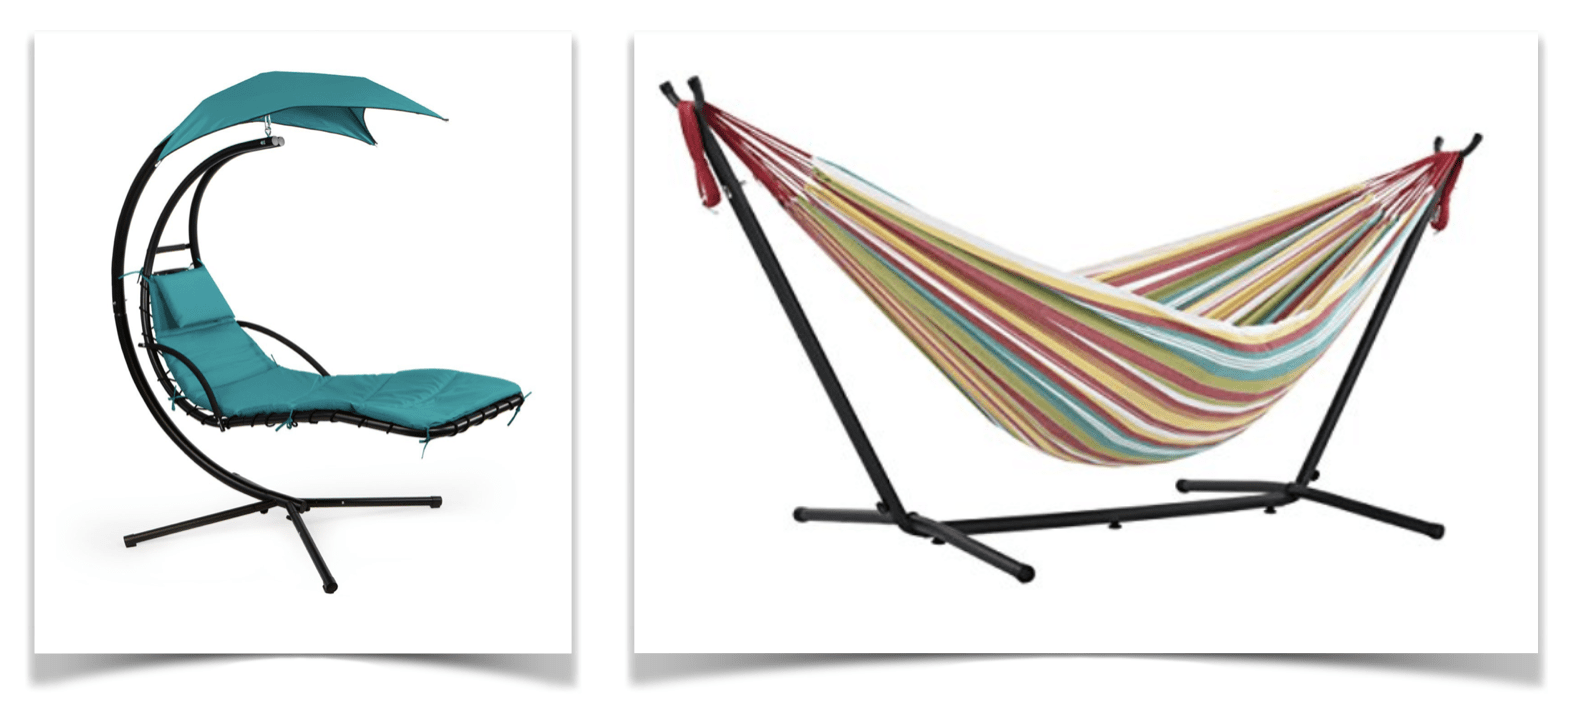 April Pools Day - Hammocks and Loungers